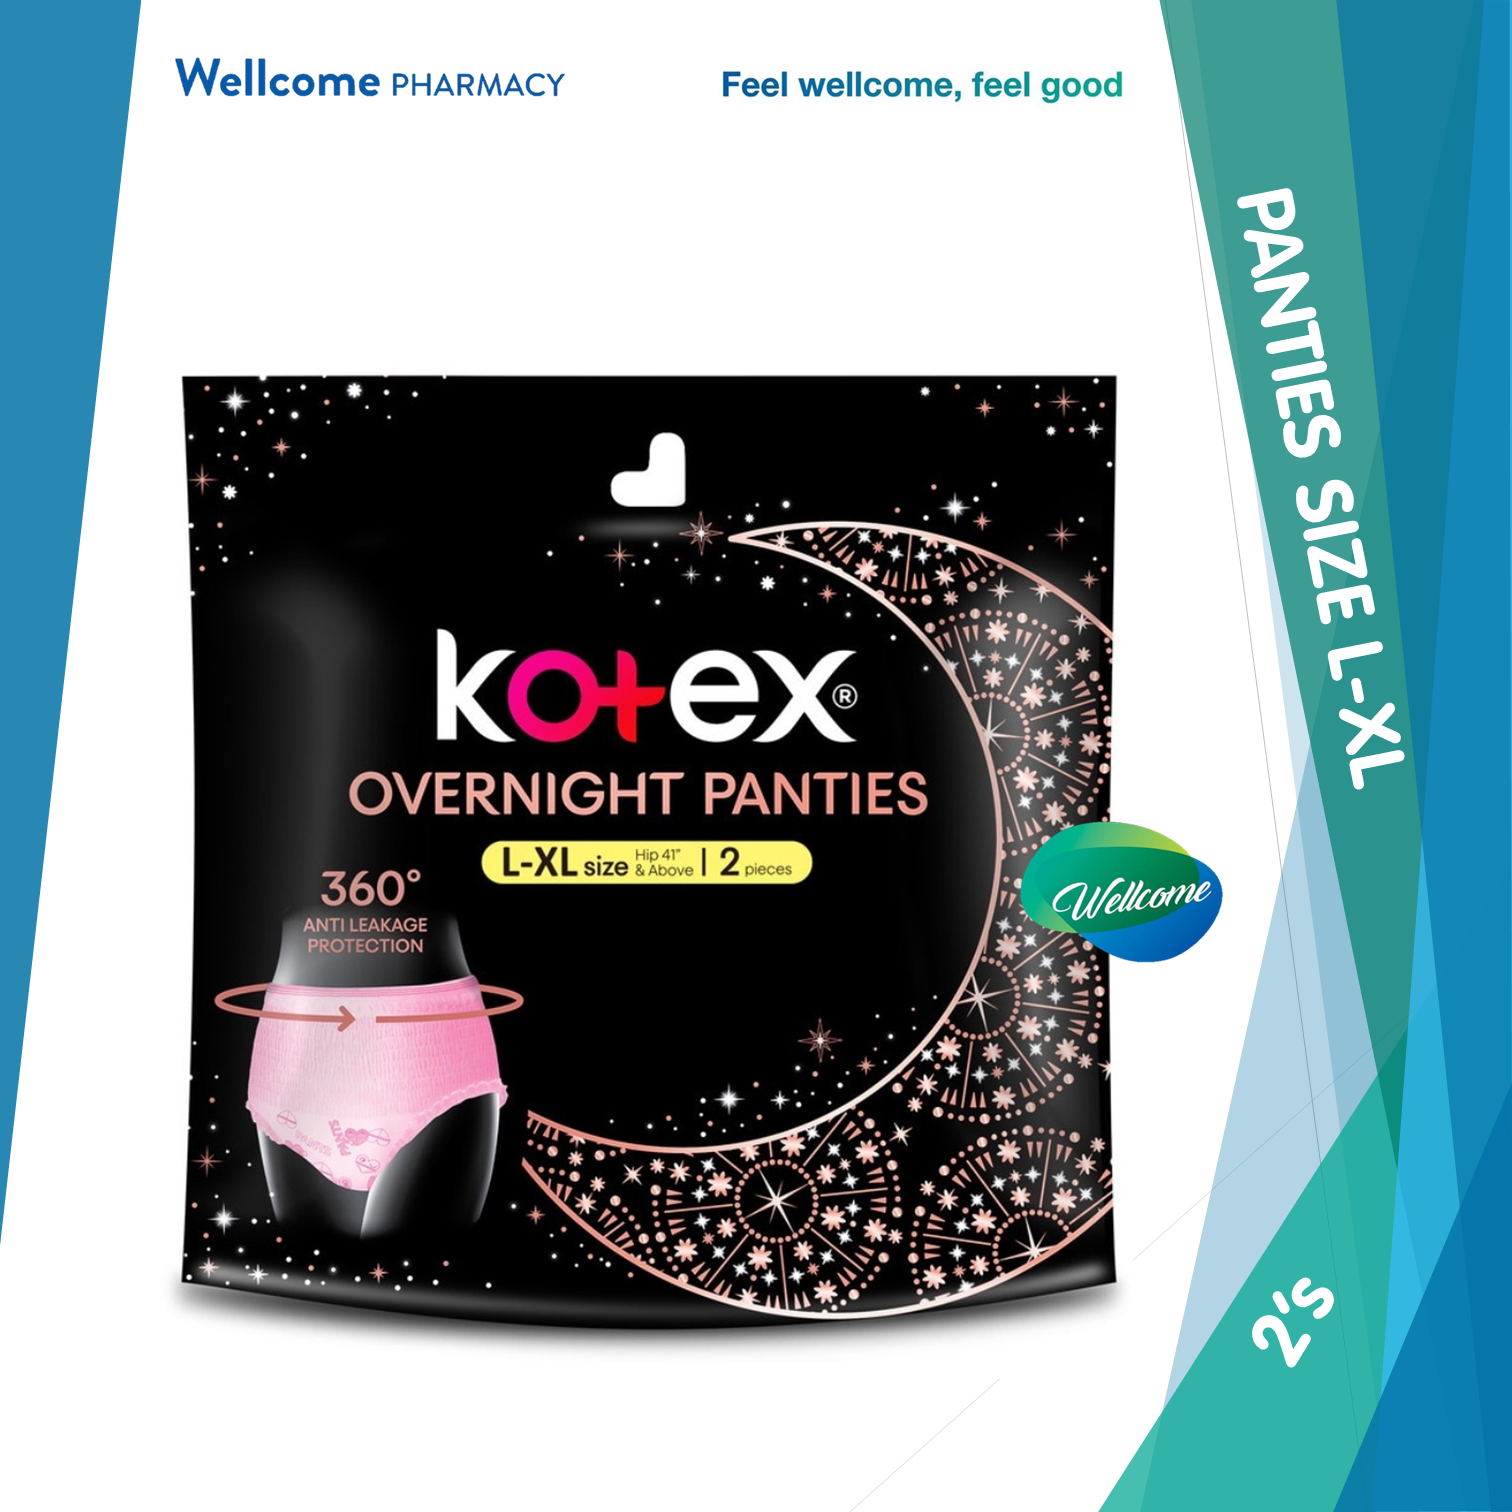 KOTEX Overnight Panties Sleepwell Size L To Xl (Now In Upsized Pack With  360 Anti Leakage Protection Gives You Safe And Comfortable Sleep) 5s, Cotton & Paper